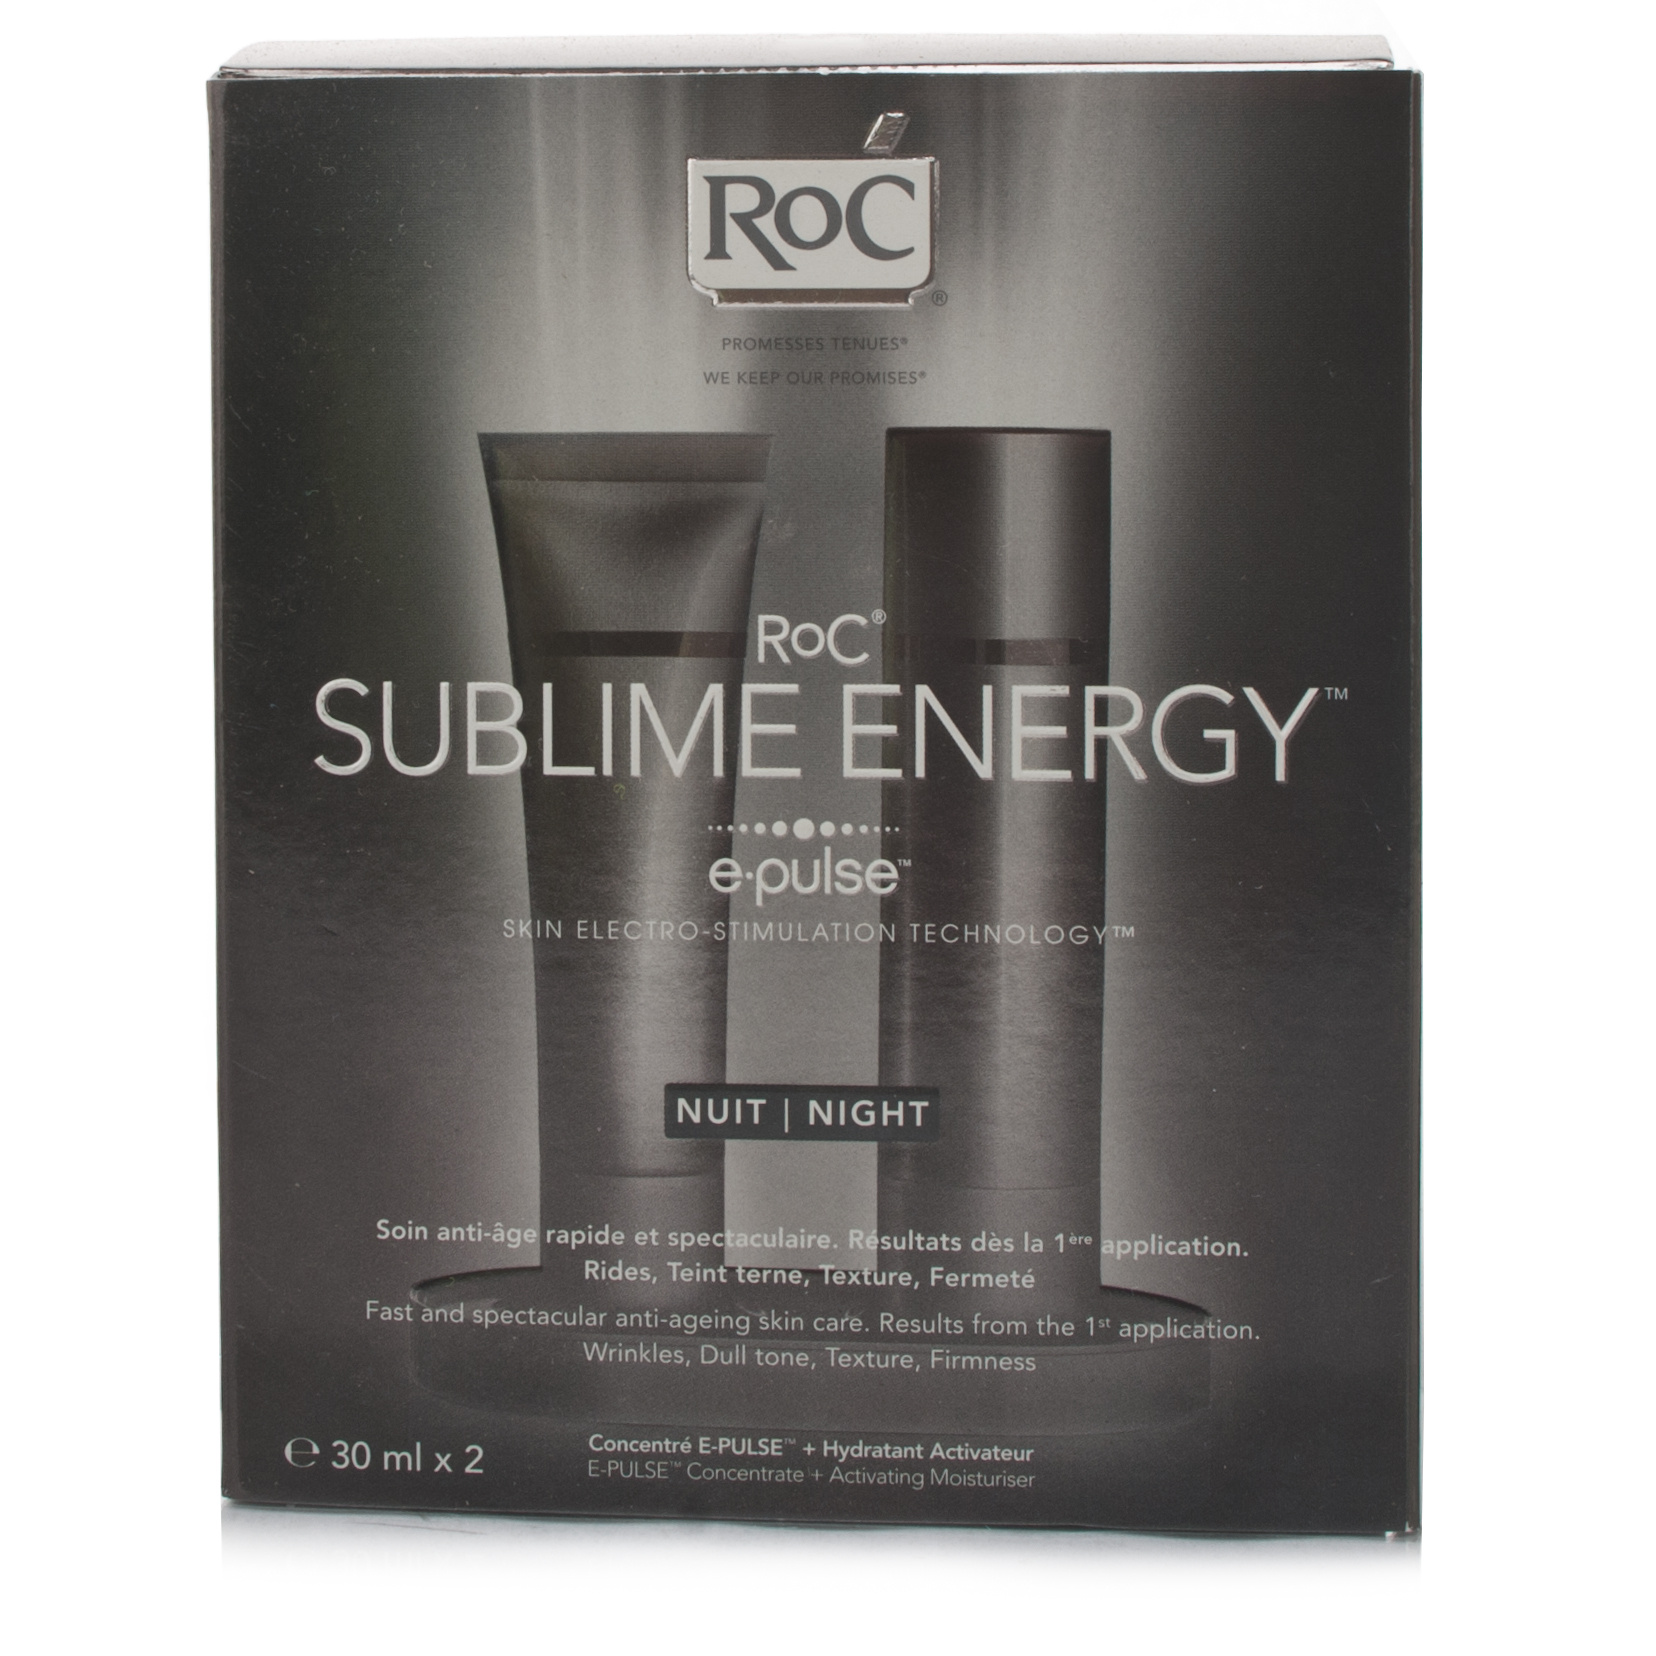 Roc Sublime Energy Night Epulse Concentrate & Activating Moisturiser 2 X 30ml